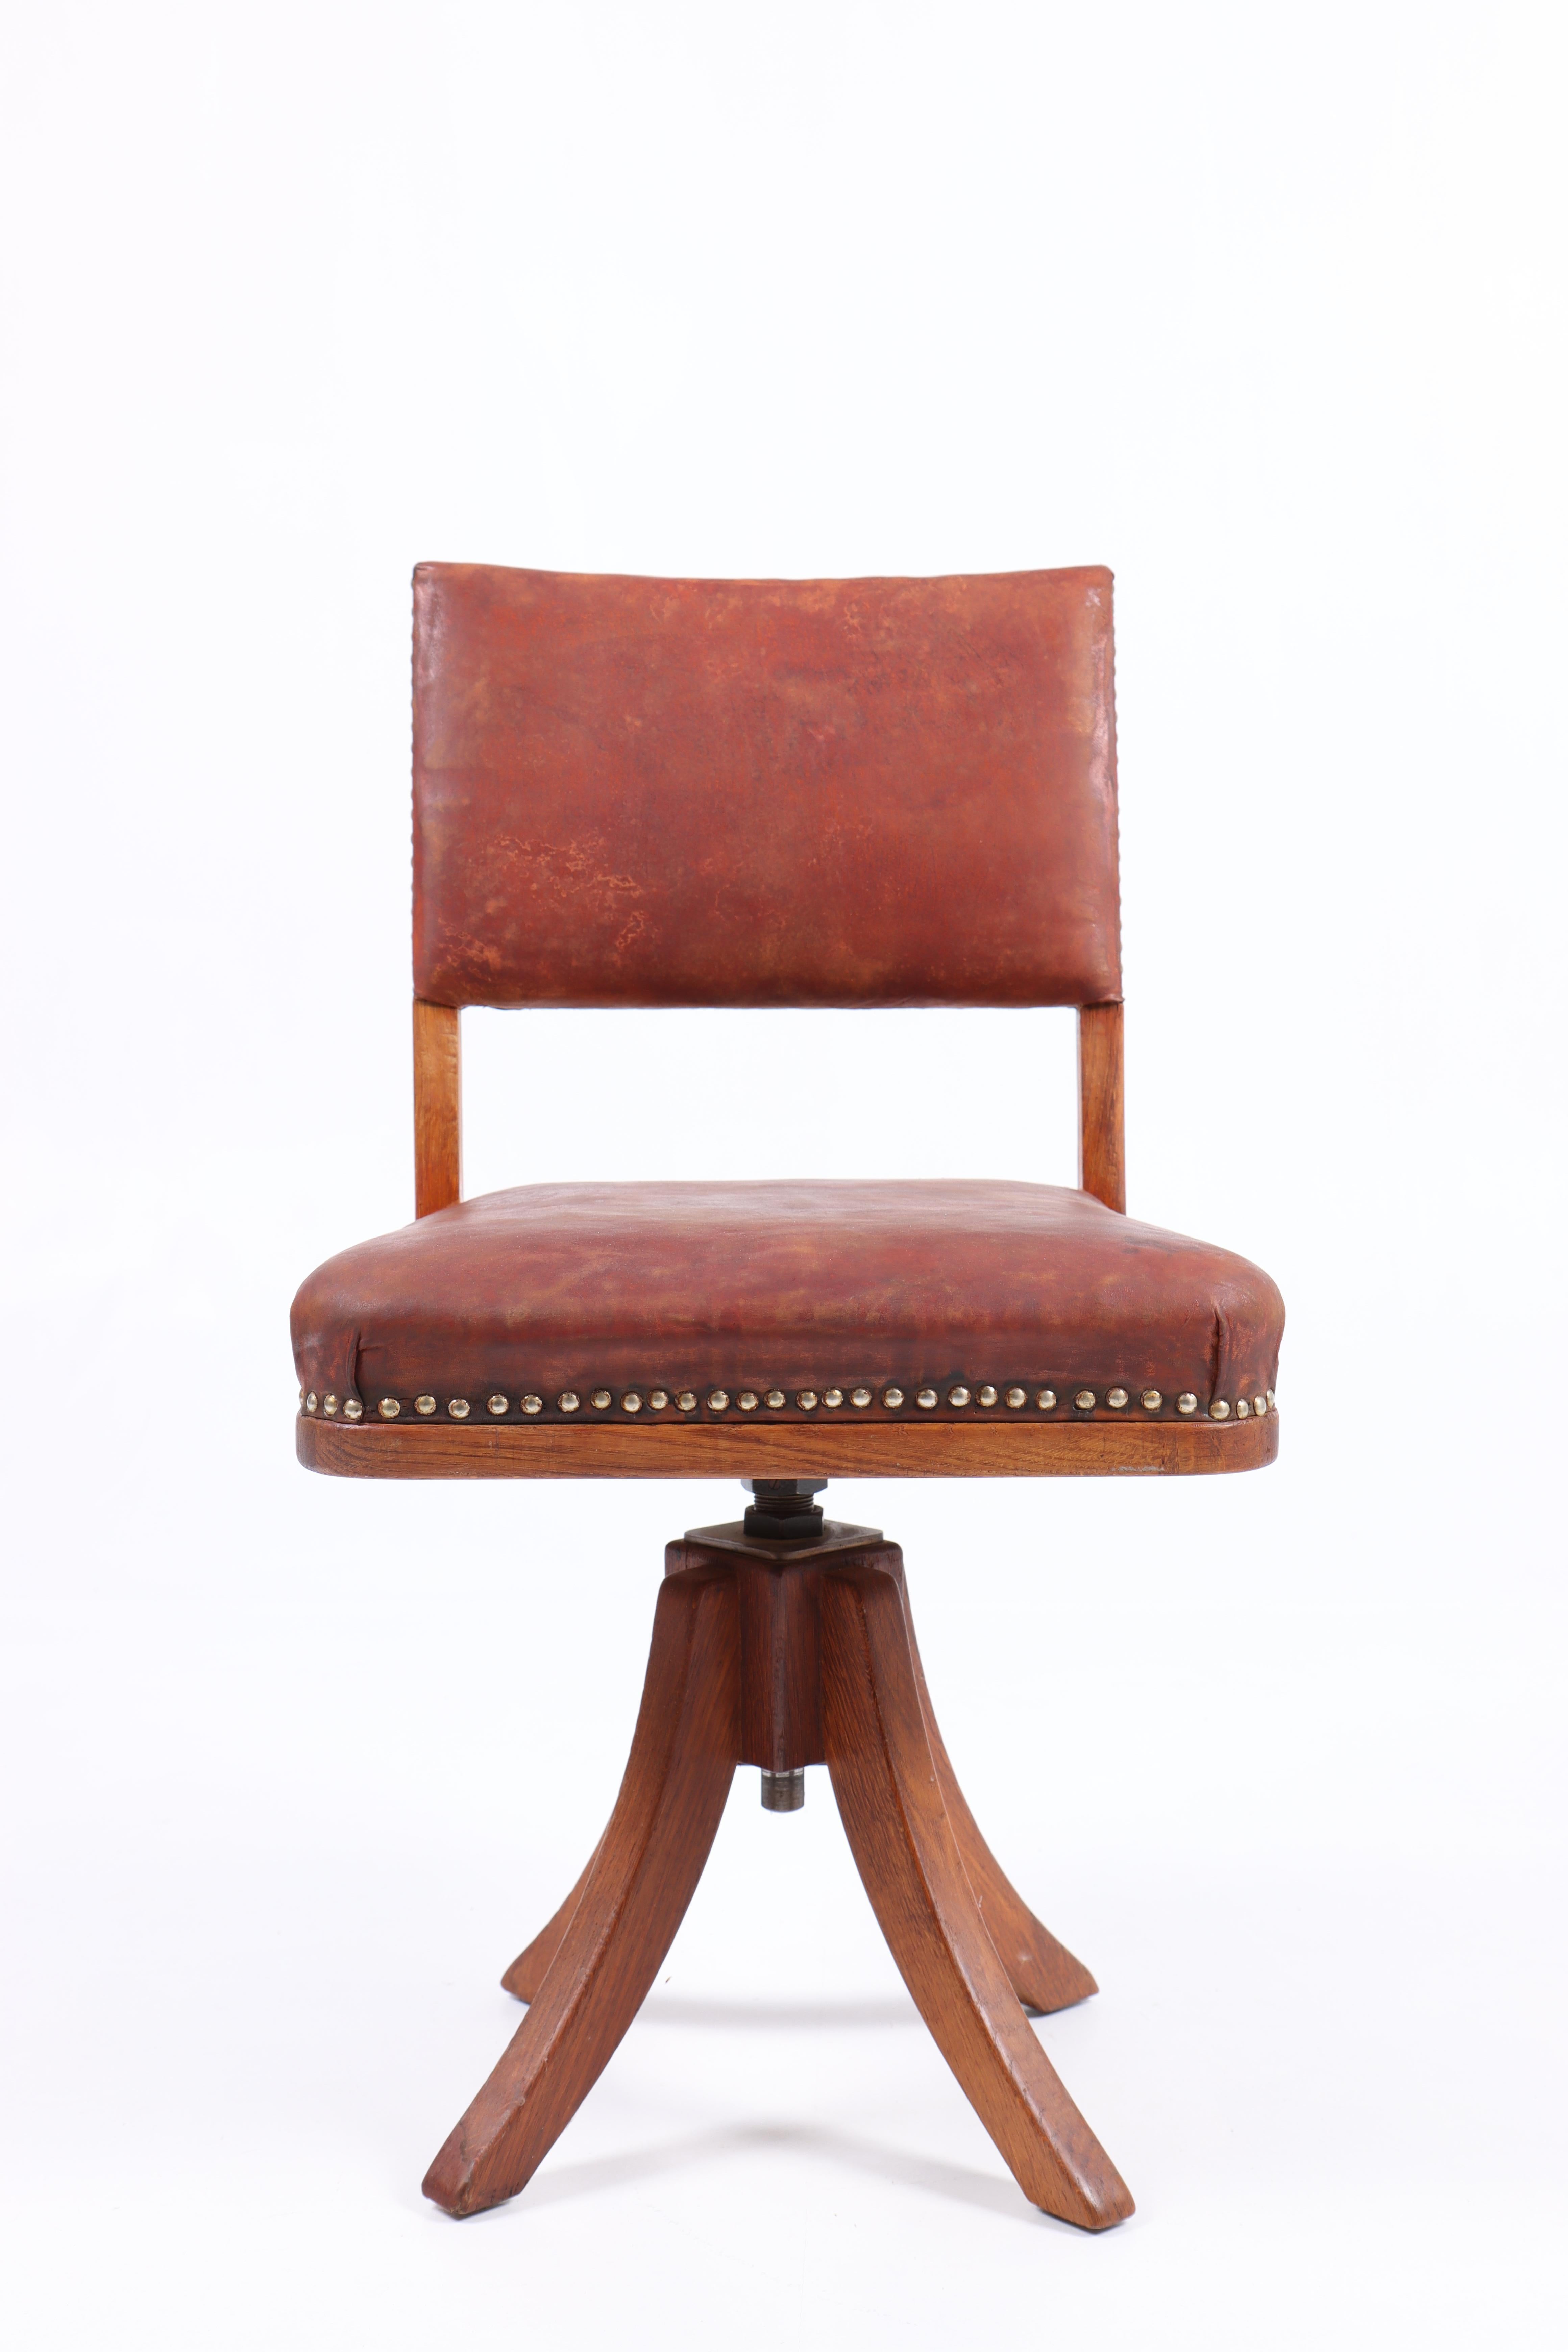 Scandinavian Modern Desk Chair in Patinated Leather and Oak by Danish Cabinetmaker Frits Henningsen For Sale